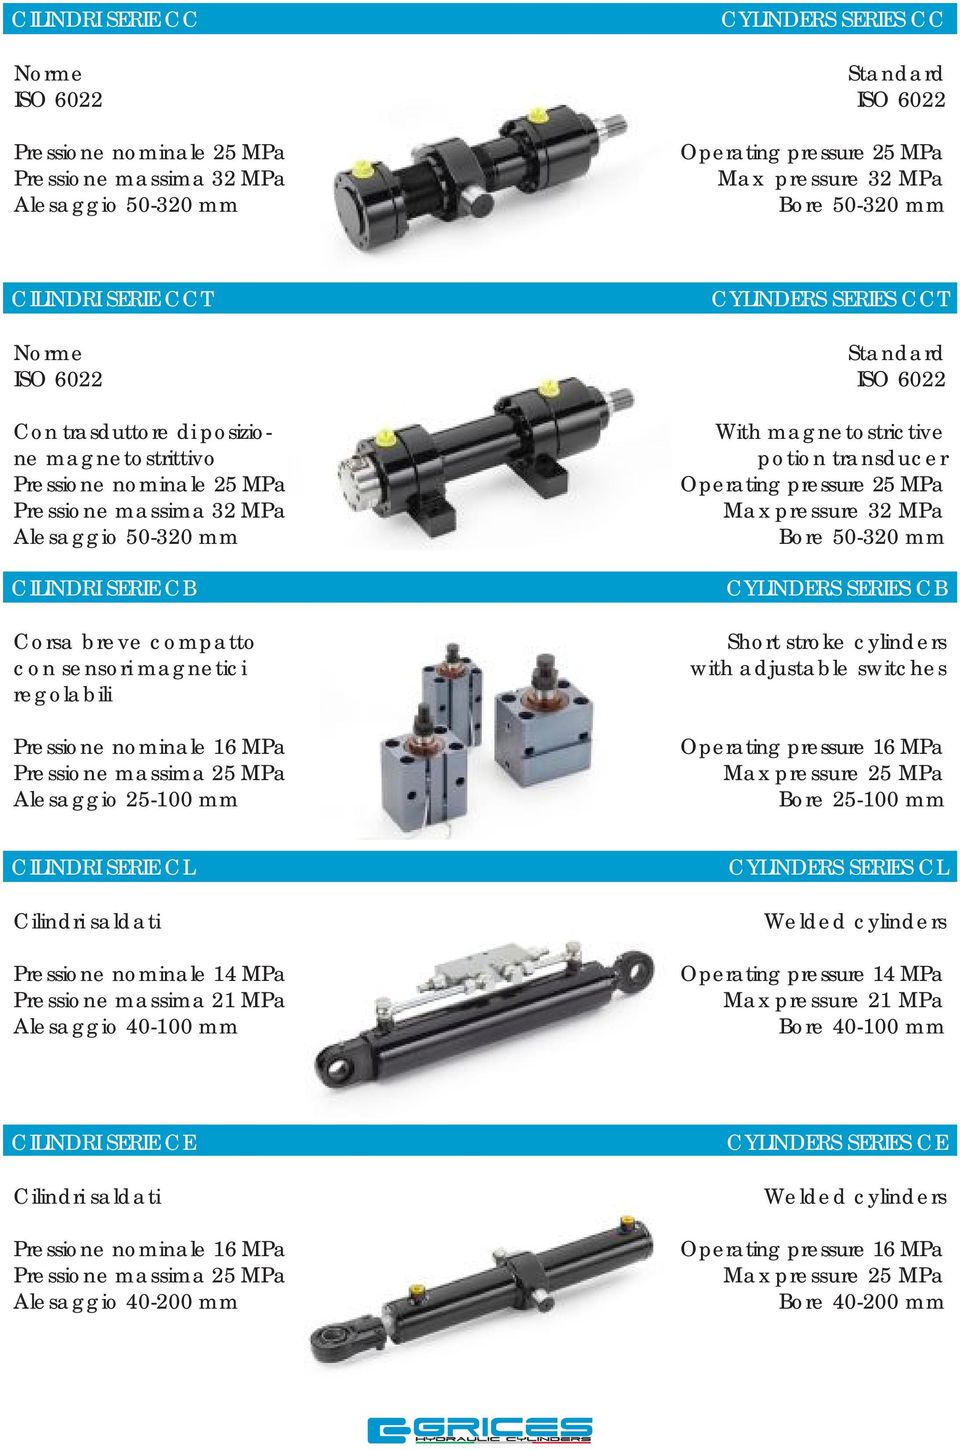 regolabili Alesaggio 25-100 mm CYLINDERS SERIES CCT ISO 6022 With magnetostrictive potion transducer Operating pressure 25 MPa Max pressure 32 MPa Bore 50-320 mm CYLINDERS SERIES CB Short stroke